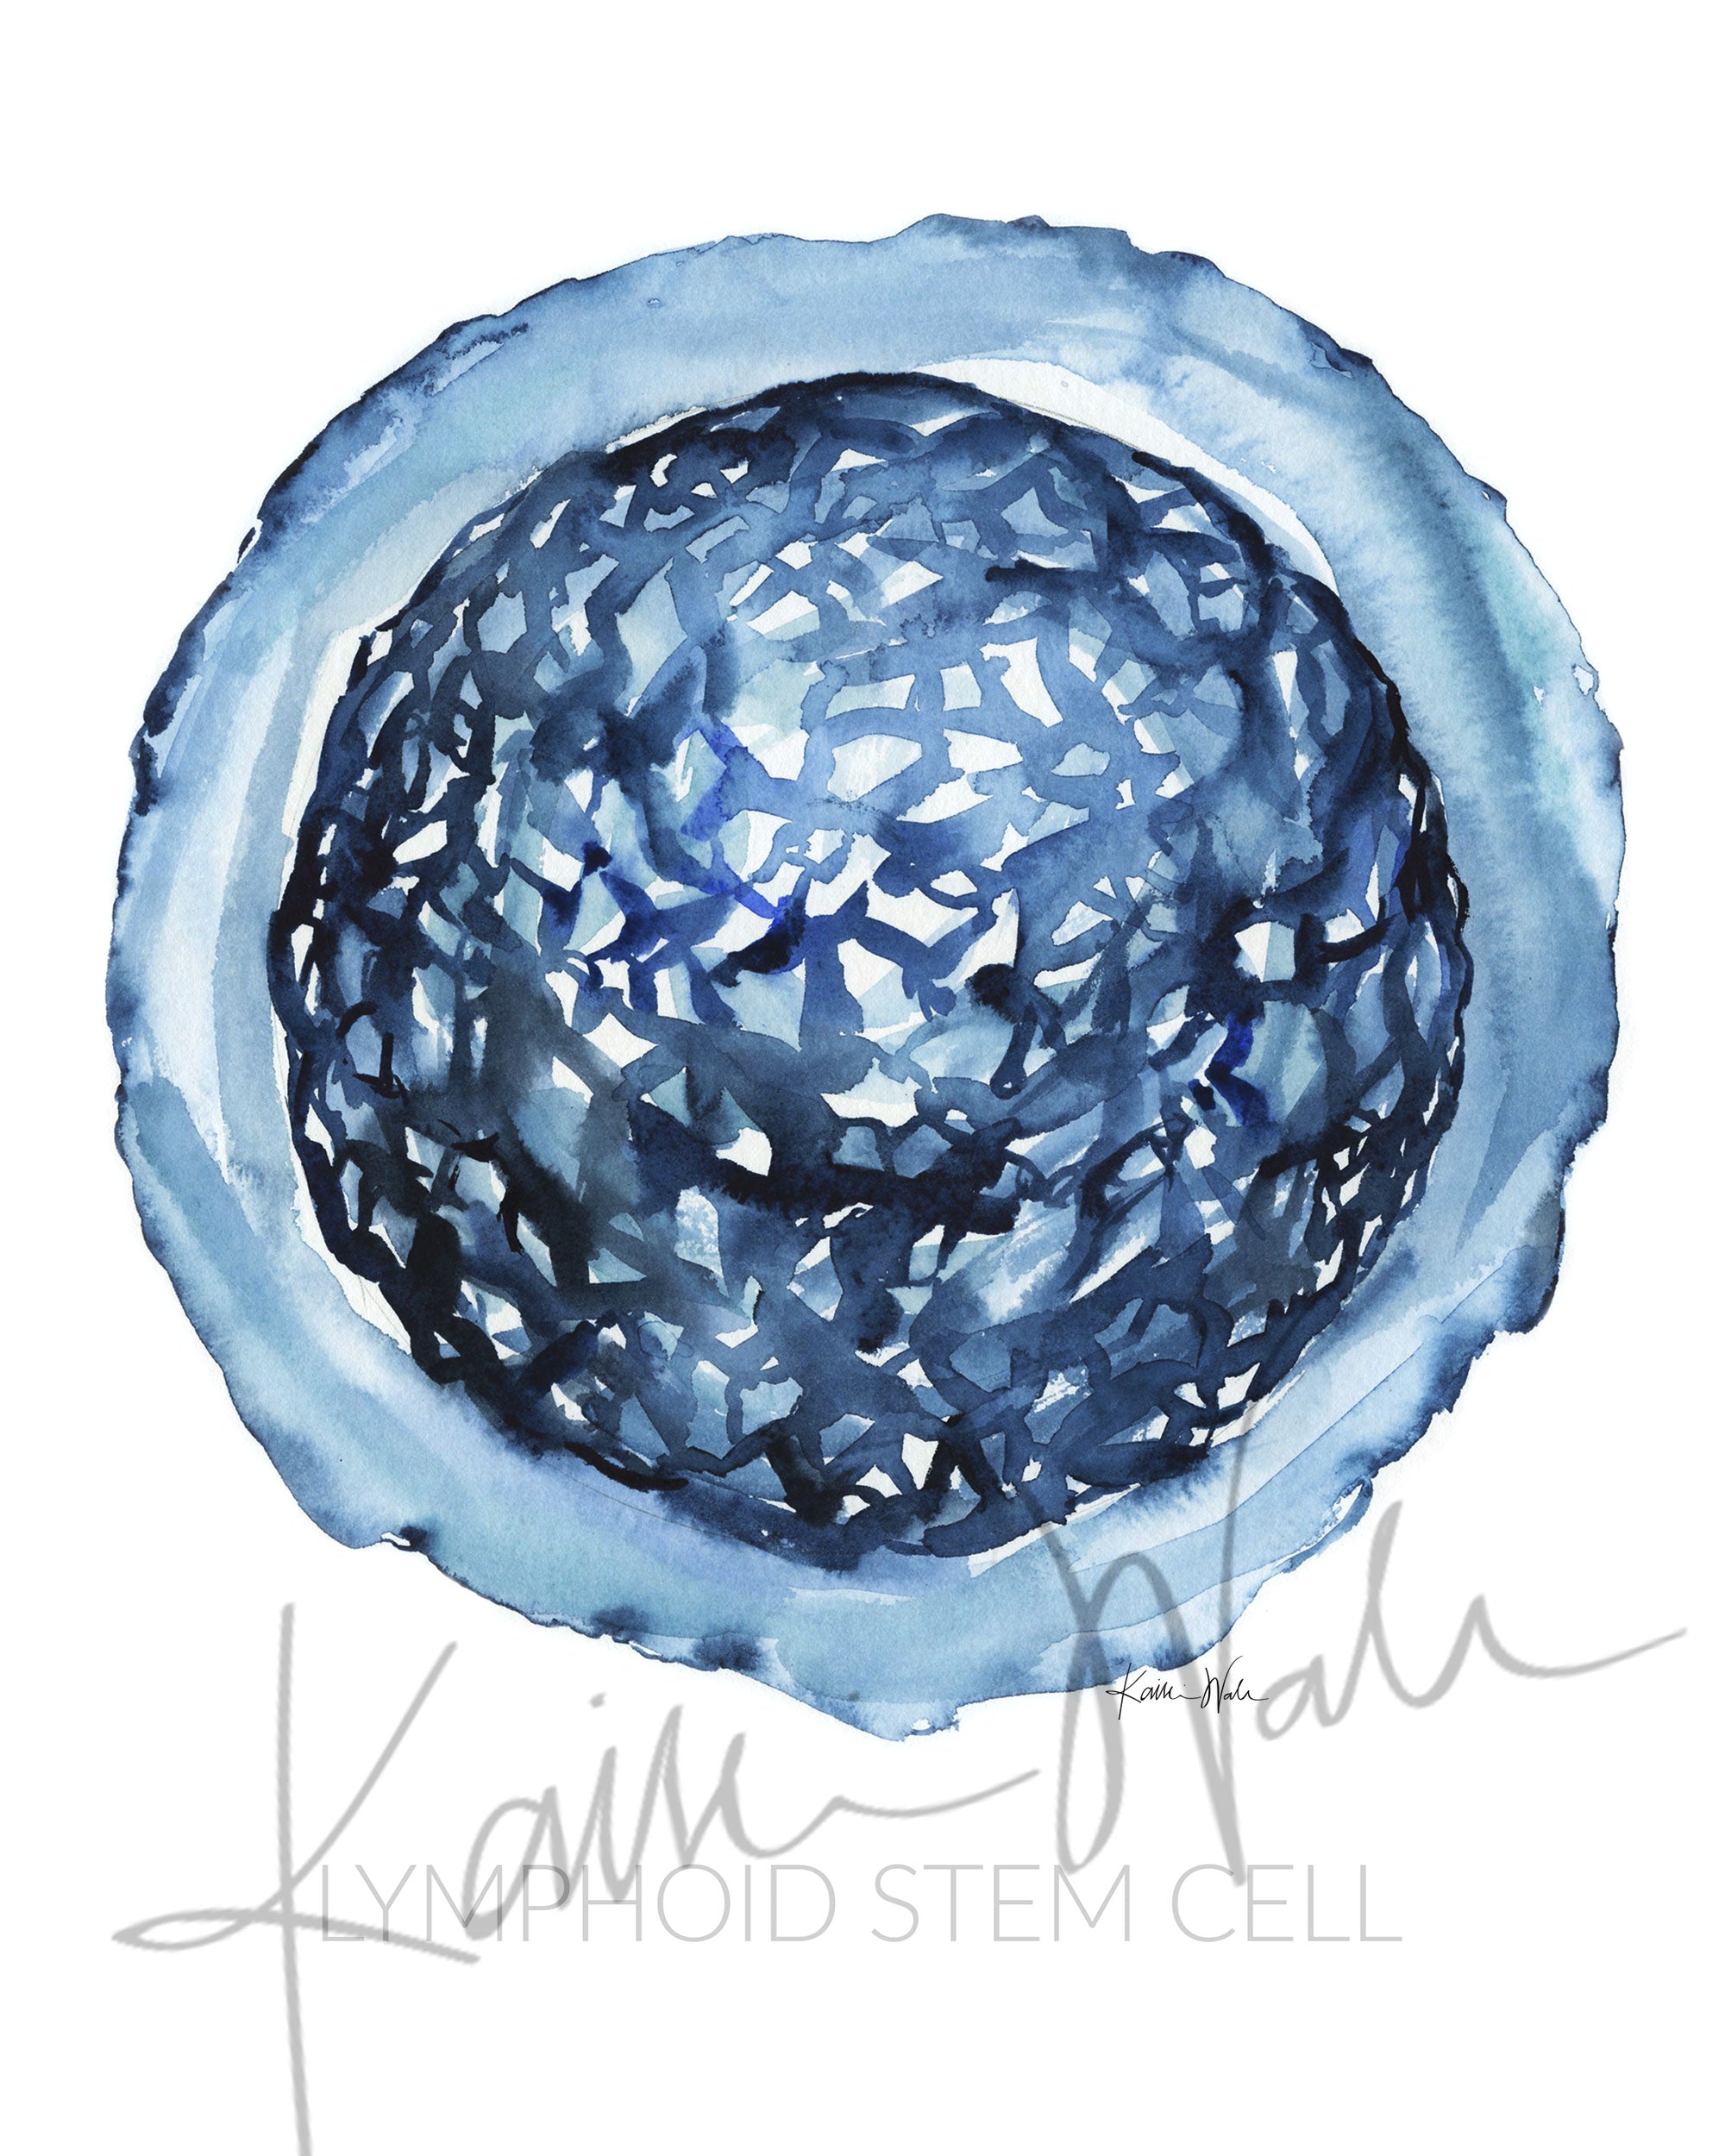 Unframed watercolor painting of Lymphoid Stem Cell.